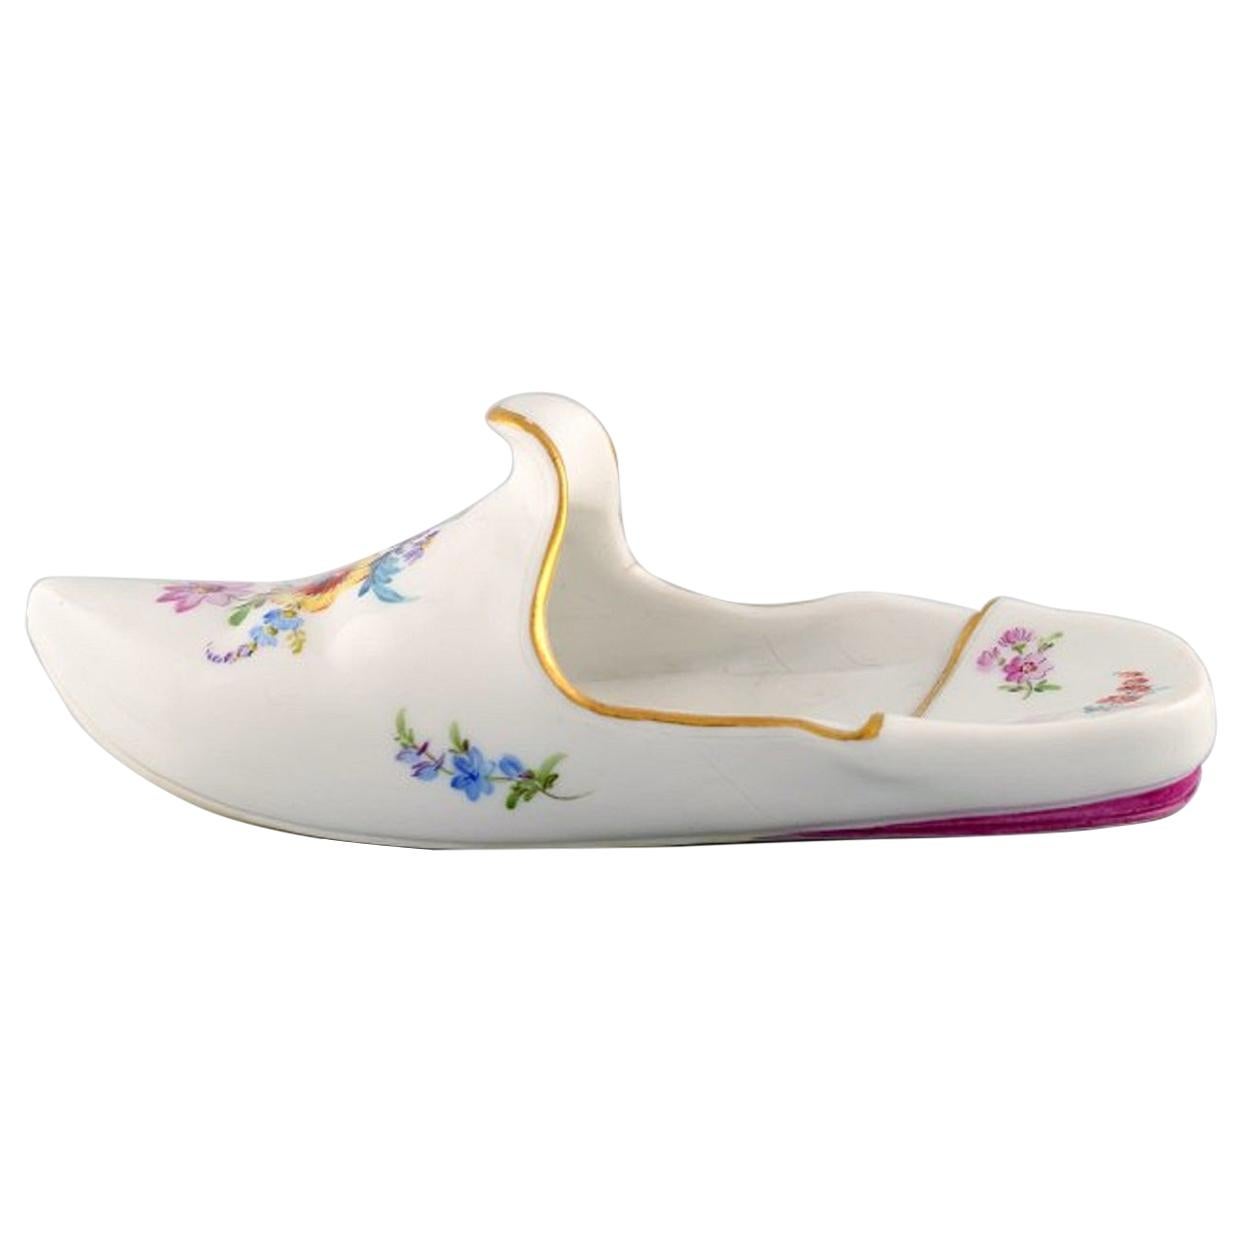 Antik Meissen Slipper in Hand Painted Porcelain with Floral Motifs, 19th Century For Sale